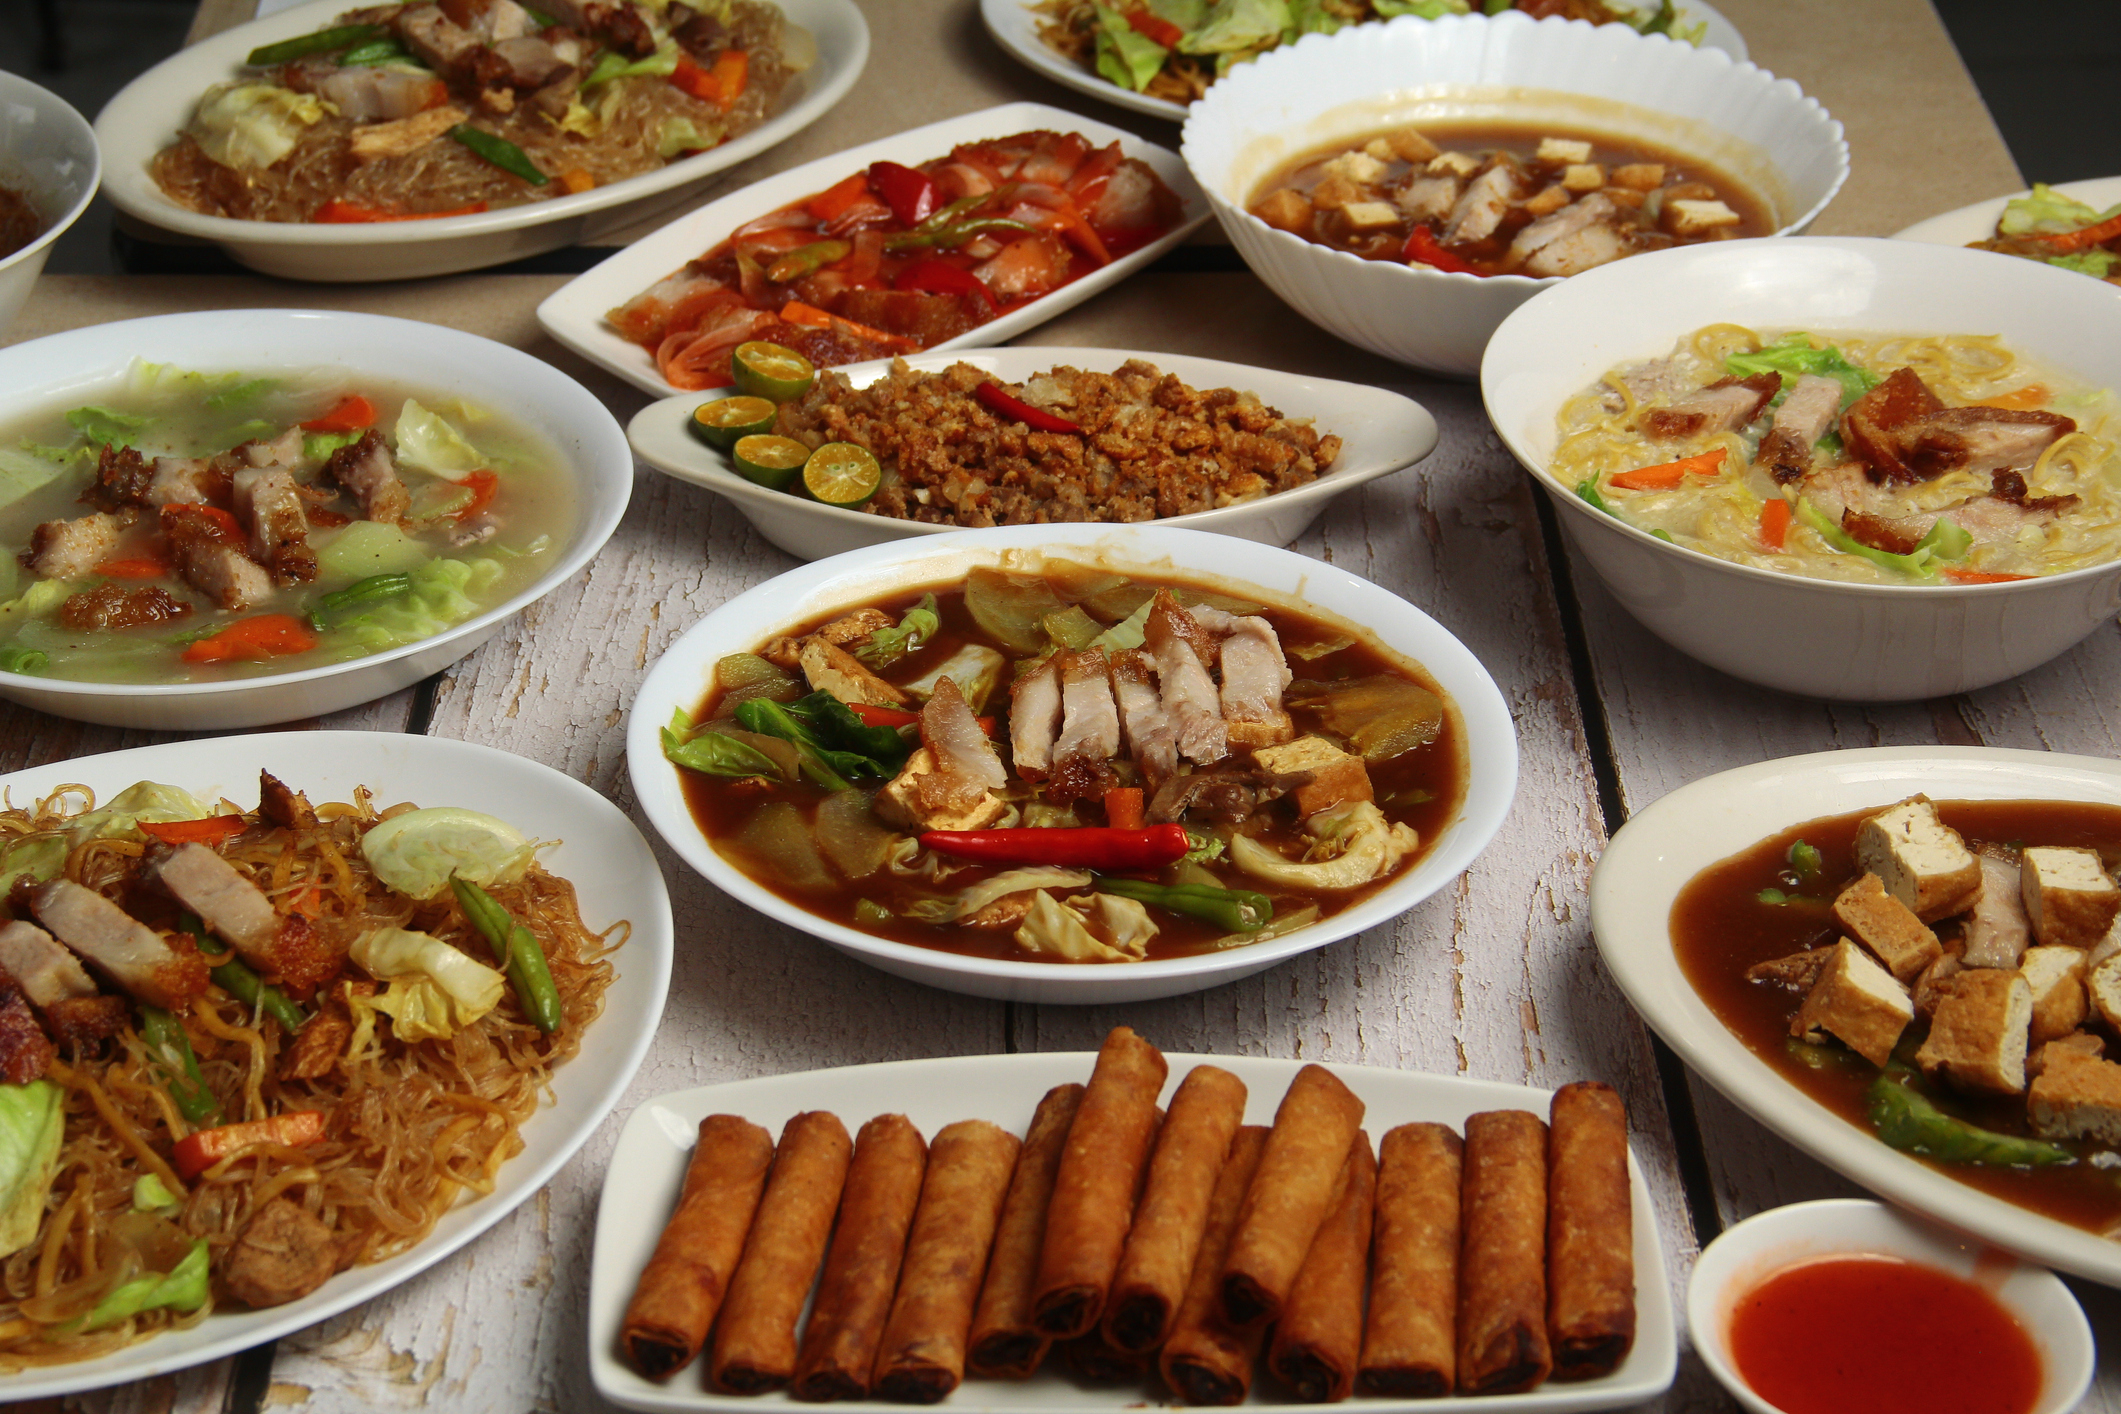 Assortment of Asian dishes, including noodles, spring rolls, and soups on a wooden table